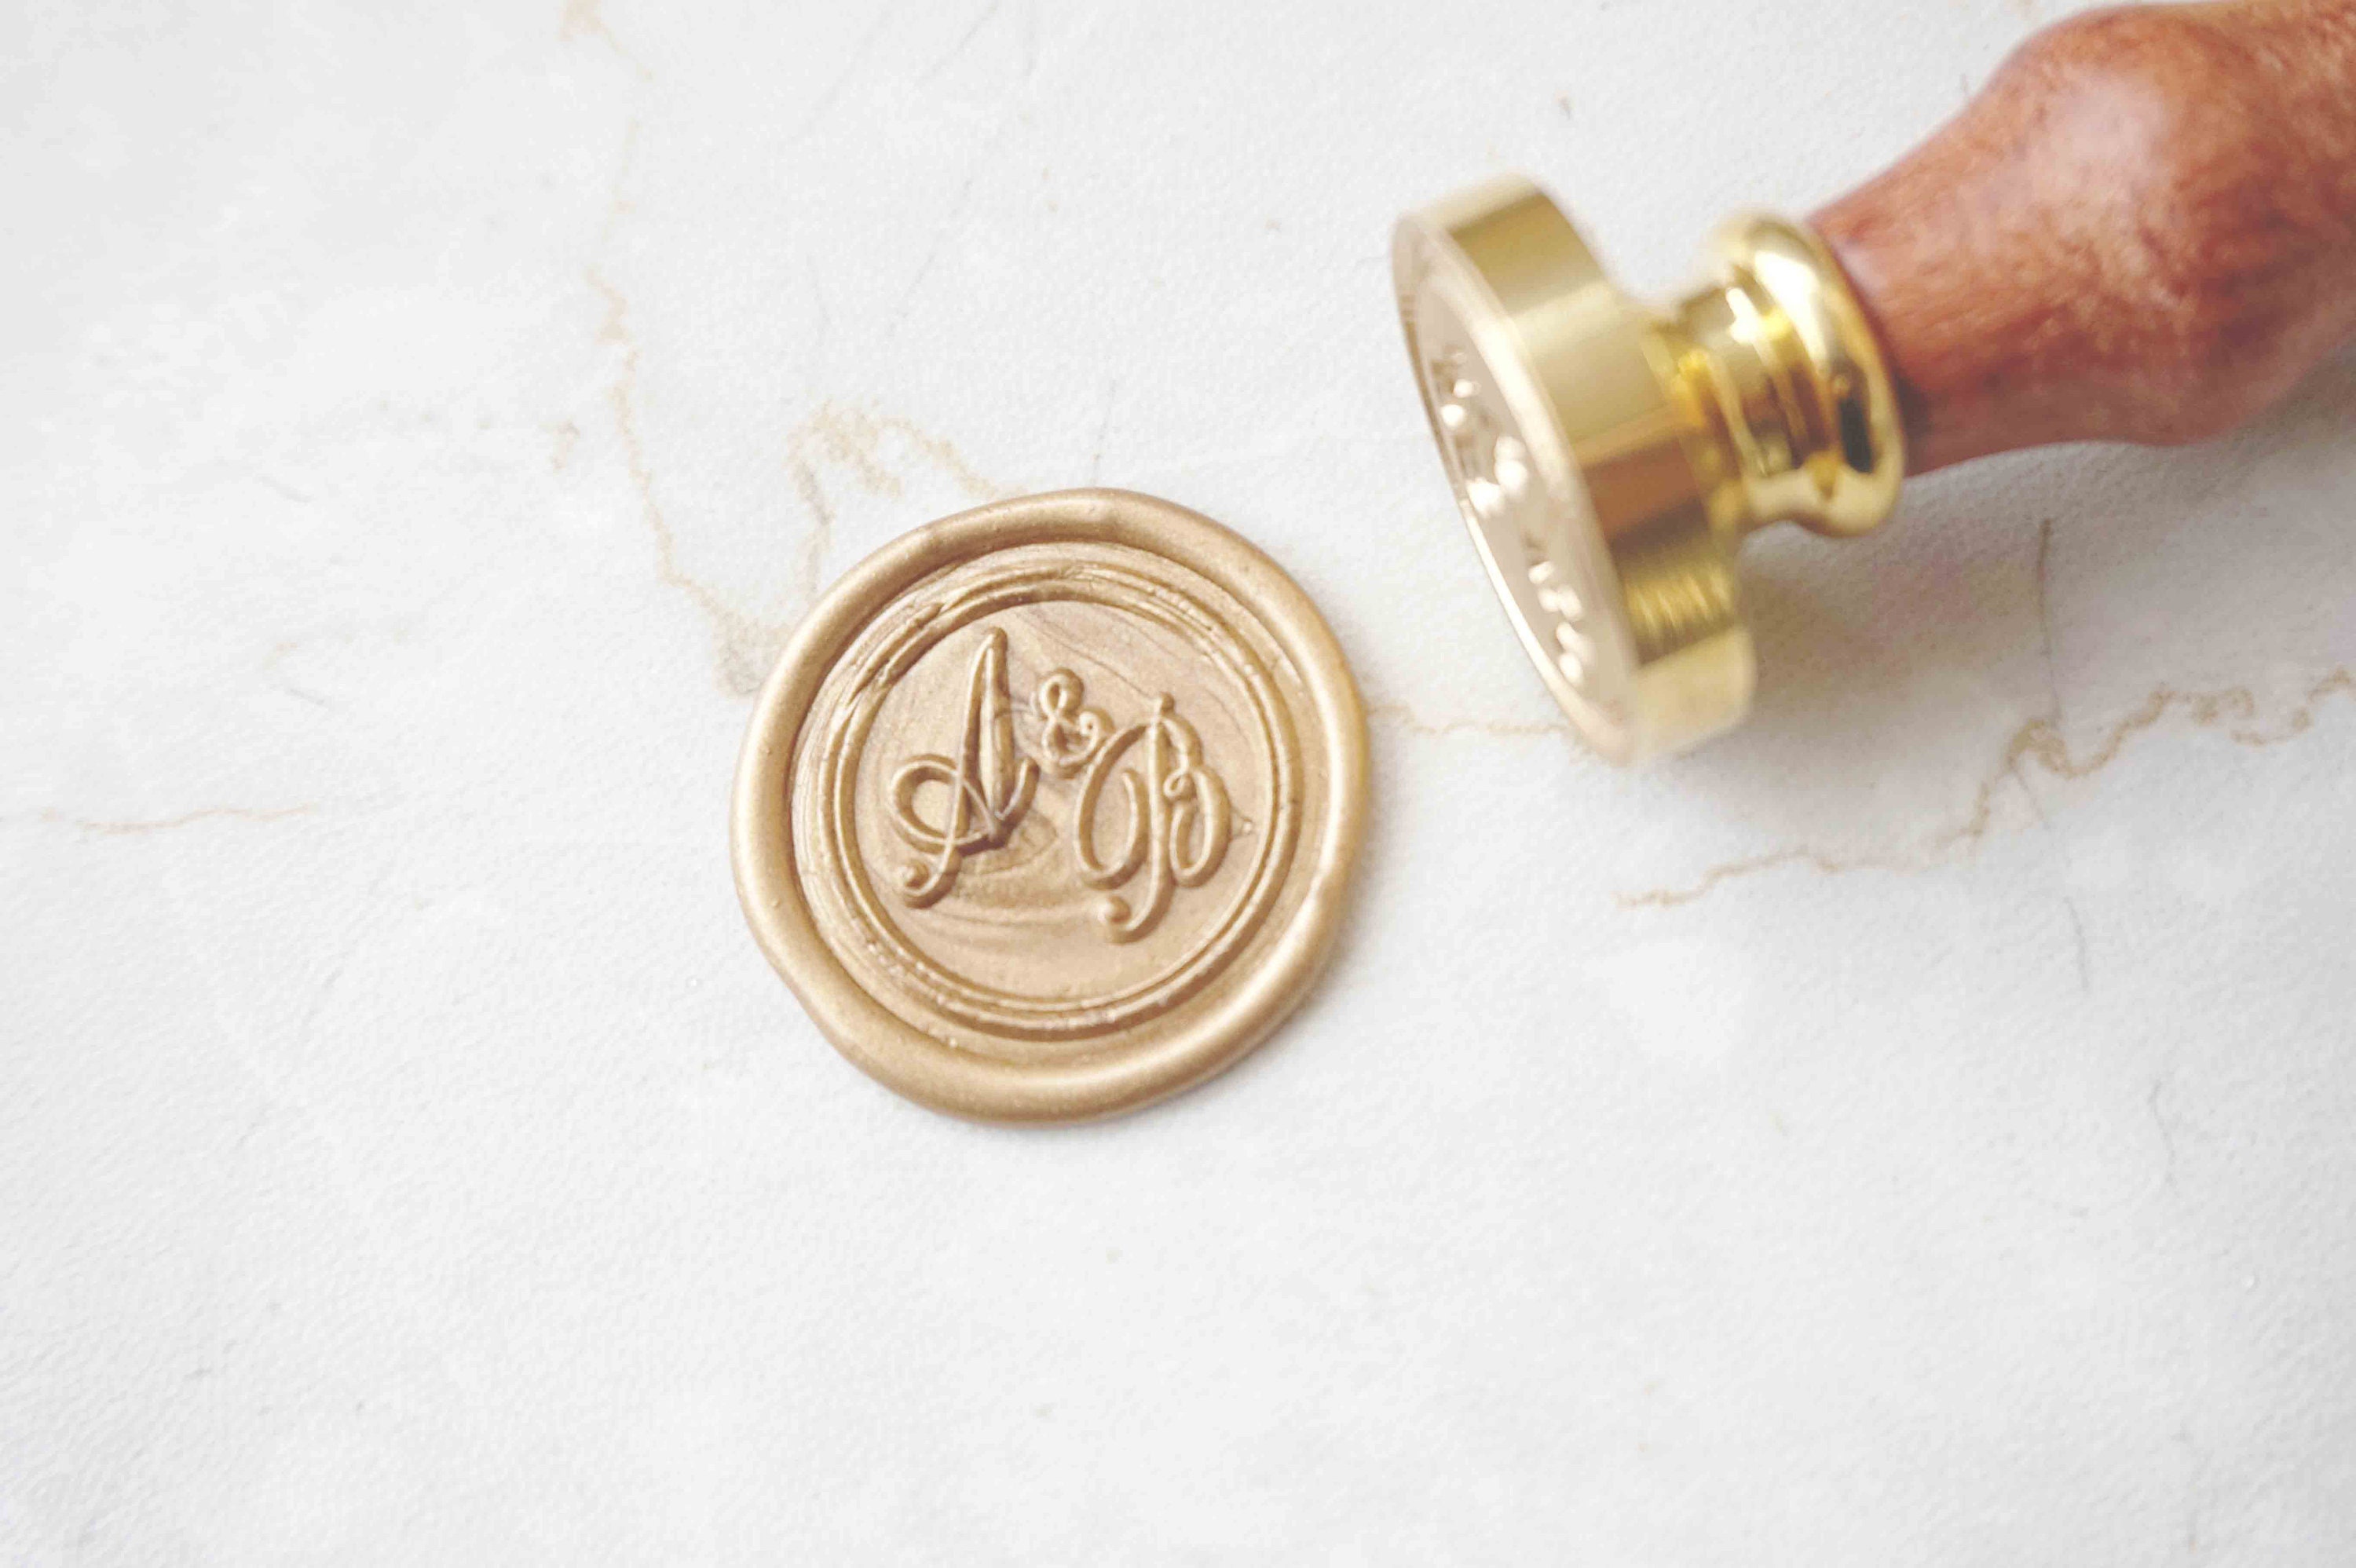 Custom wax Seal (Initials) - Purchase online from our Internet store